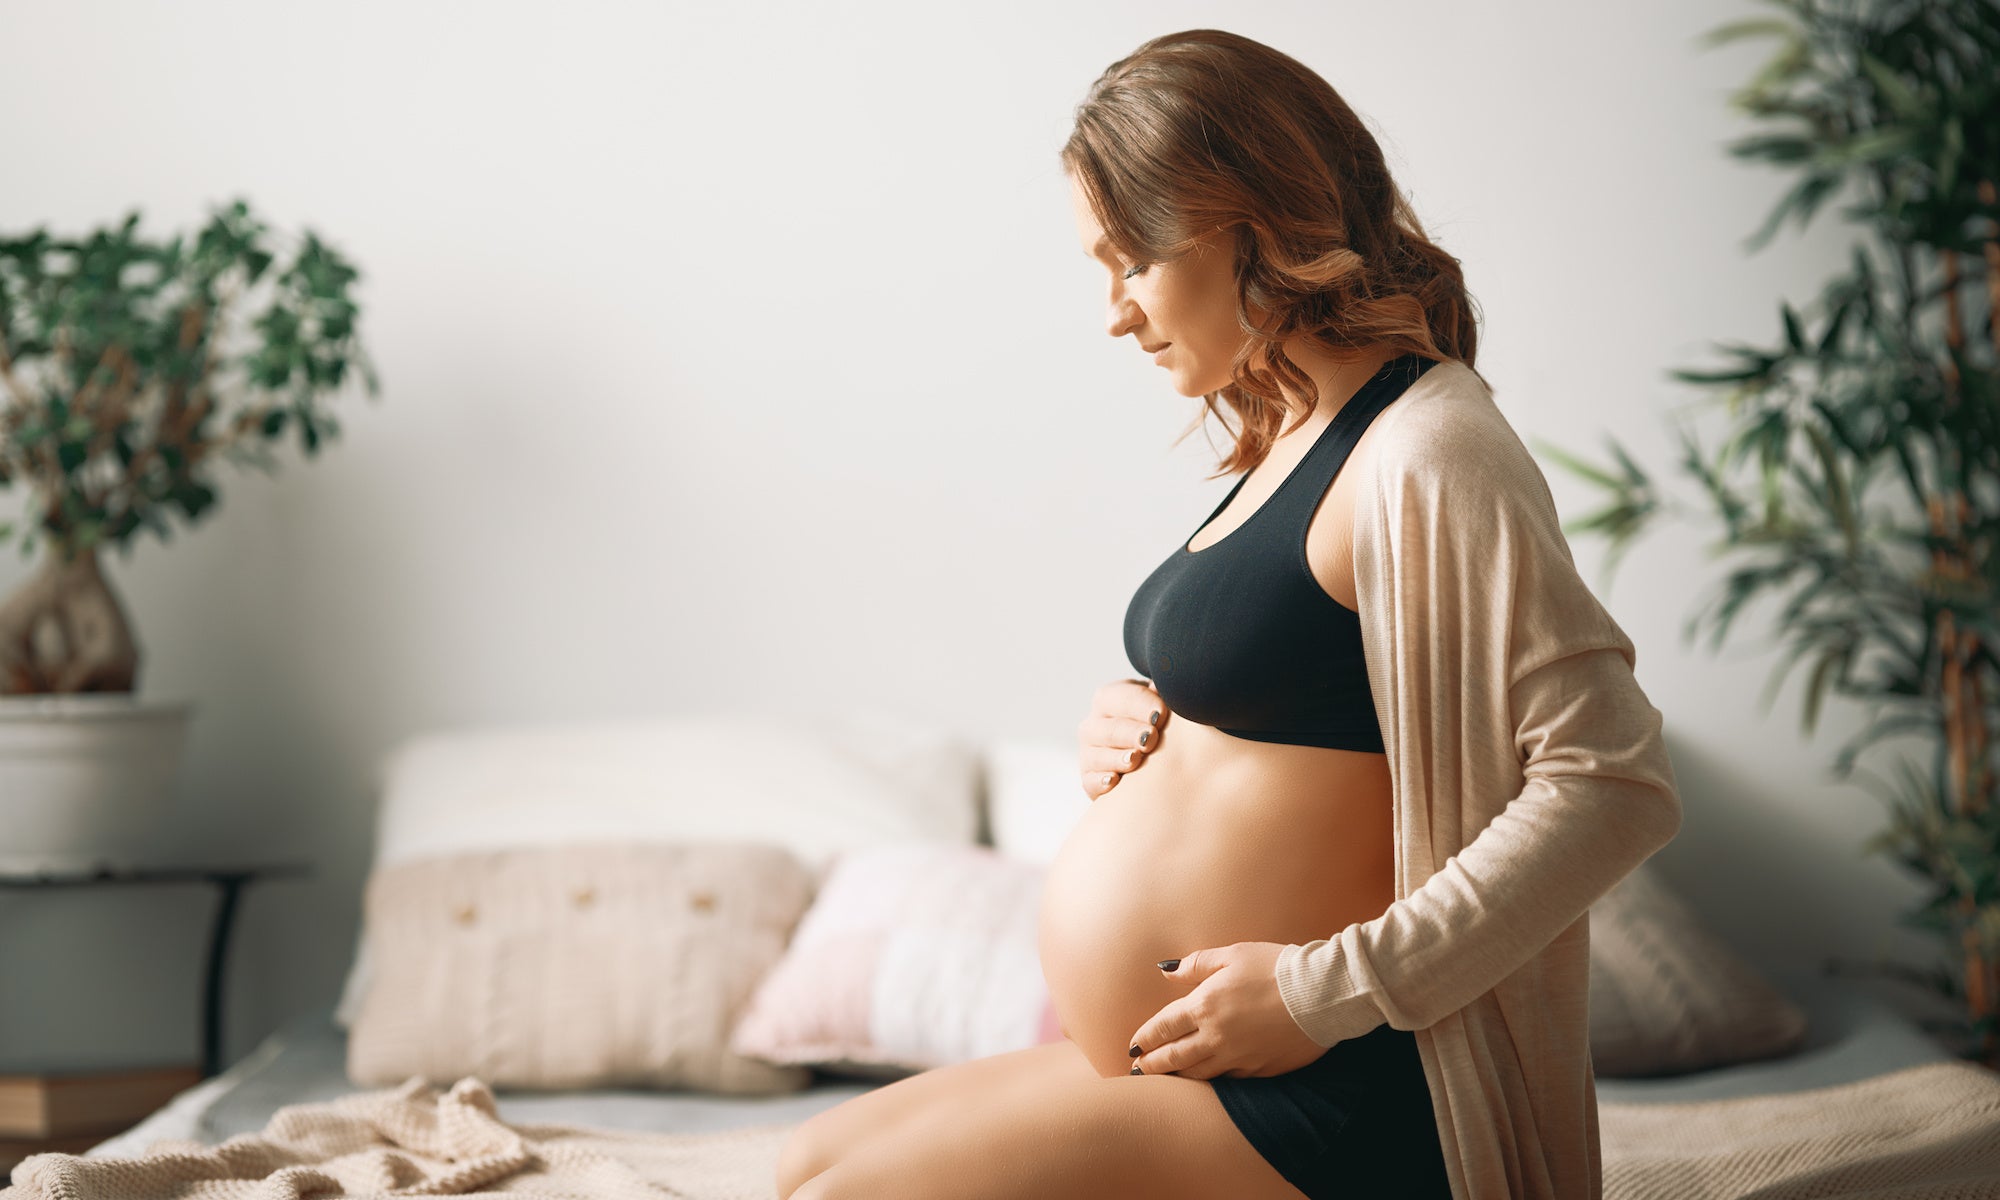 3 Common Pregnancy Skin Problems & How to Treat Them Safely